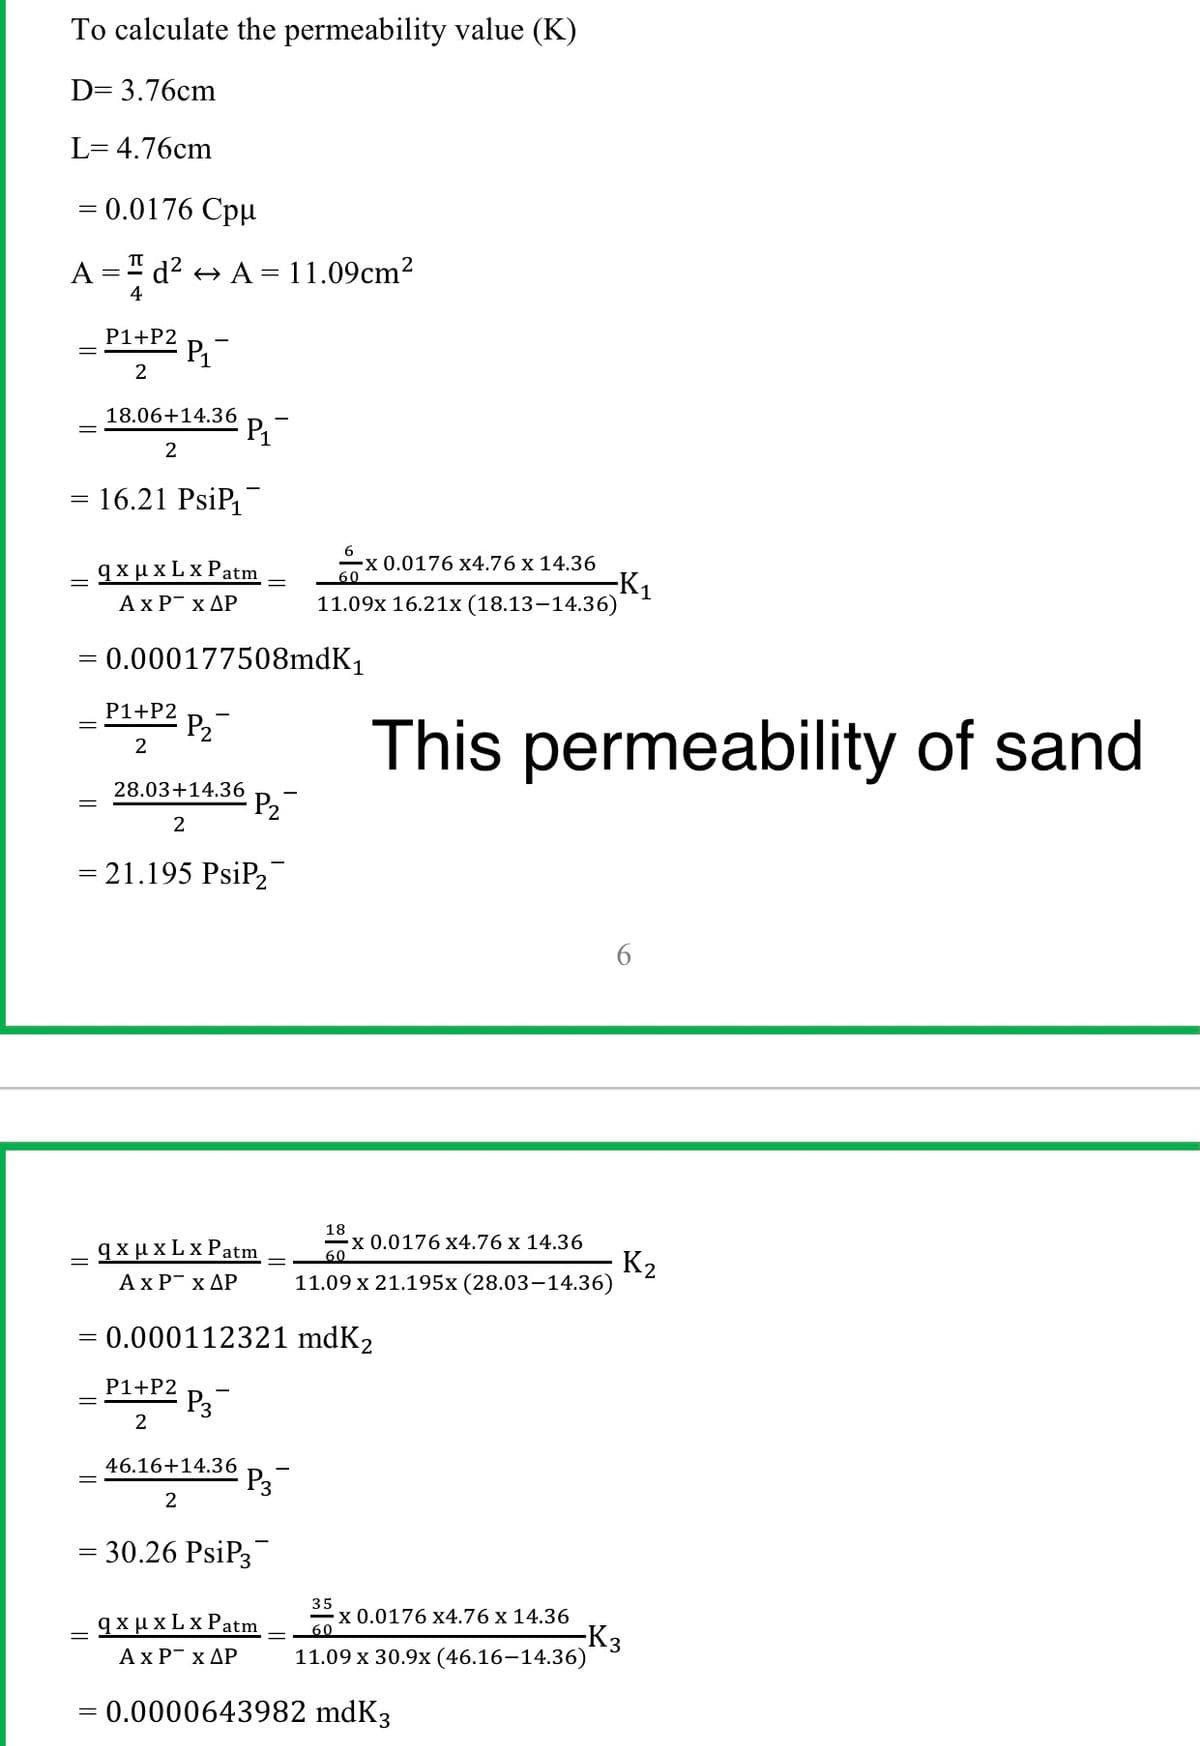 To calculate the permeability value (K)
D= 3.76cm
L= 4.76cm
= 0.0176 Cpu
A =" d? + A = 11.09cm²
4
- P1+P2 P.
2
18.06+14.36
P
2
= 16.21 PsiP
2 0.0176 x4.76 x 14.36
q xux L x Patm
AxP x AP
-K1
11.09x 16.21x (18.13–14.36)
= 0.000177508mdK1
P1+P2
P2
2
-
This permeability of sand
28.03+14.36
P2
2
= 21.195 PsiP2
18
qxμxLx Patm
2 0.0176 x4.76 x 14.36
60
K2
11.09 x 21.195x (28.03–14.36)
Ax PT x ΔΡ
= 0.000112321 mdK2
P1+P2
P3
46.16+14.36
P3
2
= 30.26 PsiP3
35
X 0.0176 x4.76 x 14.36
60
qxμxLxPatm
AxP x AP
K3
11.09 x 30.9x (46.16–14.36)
= 0.0000643982 mdK3
